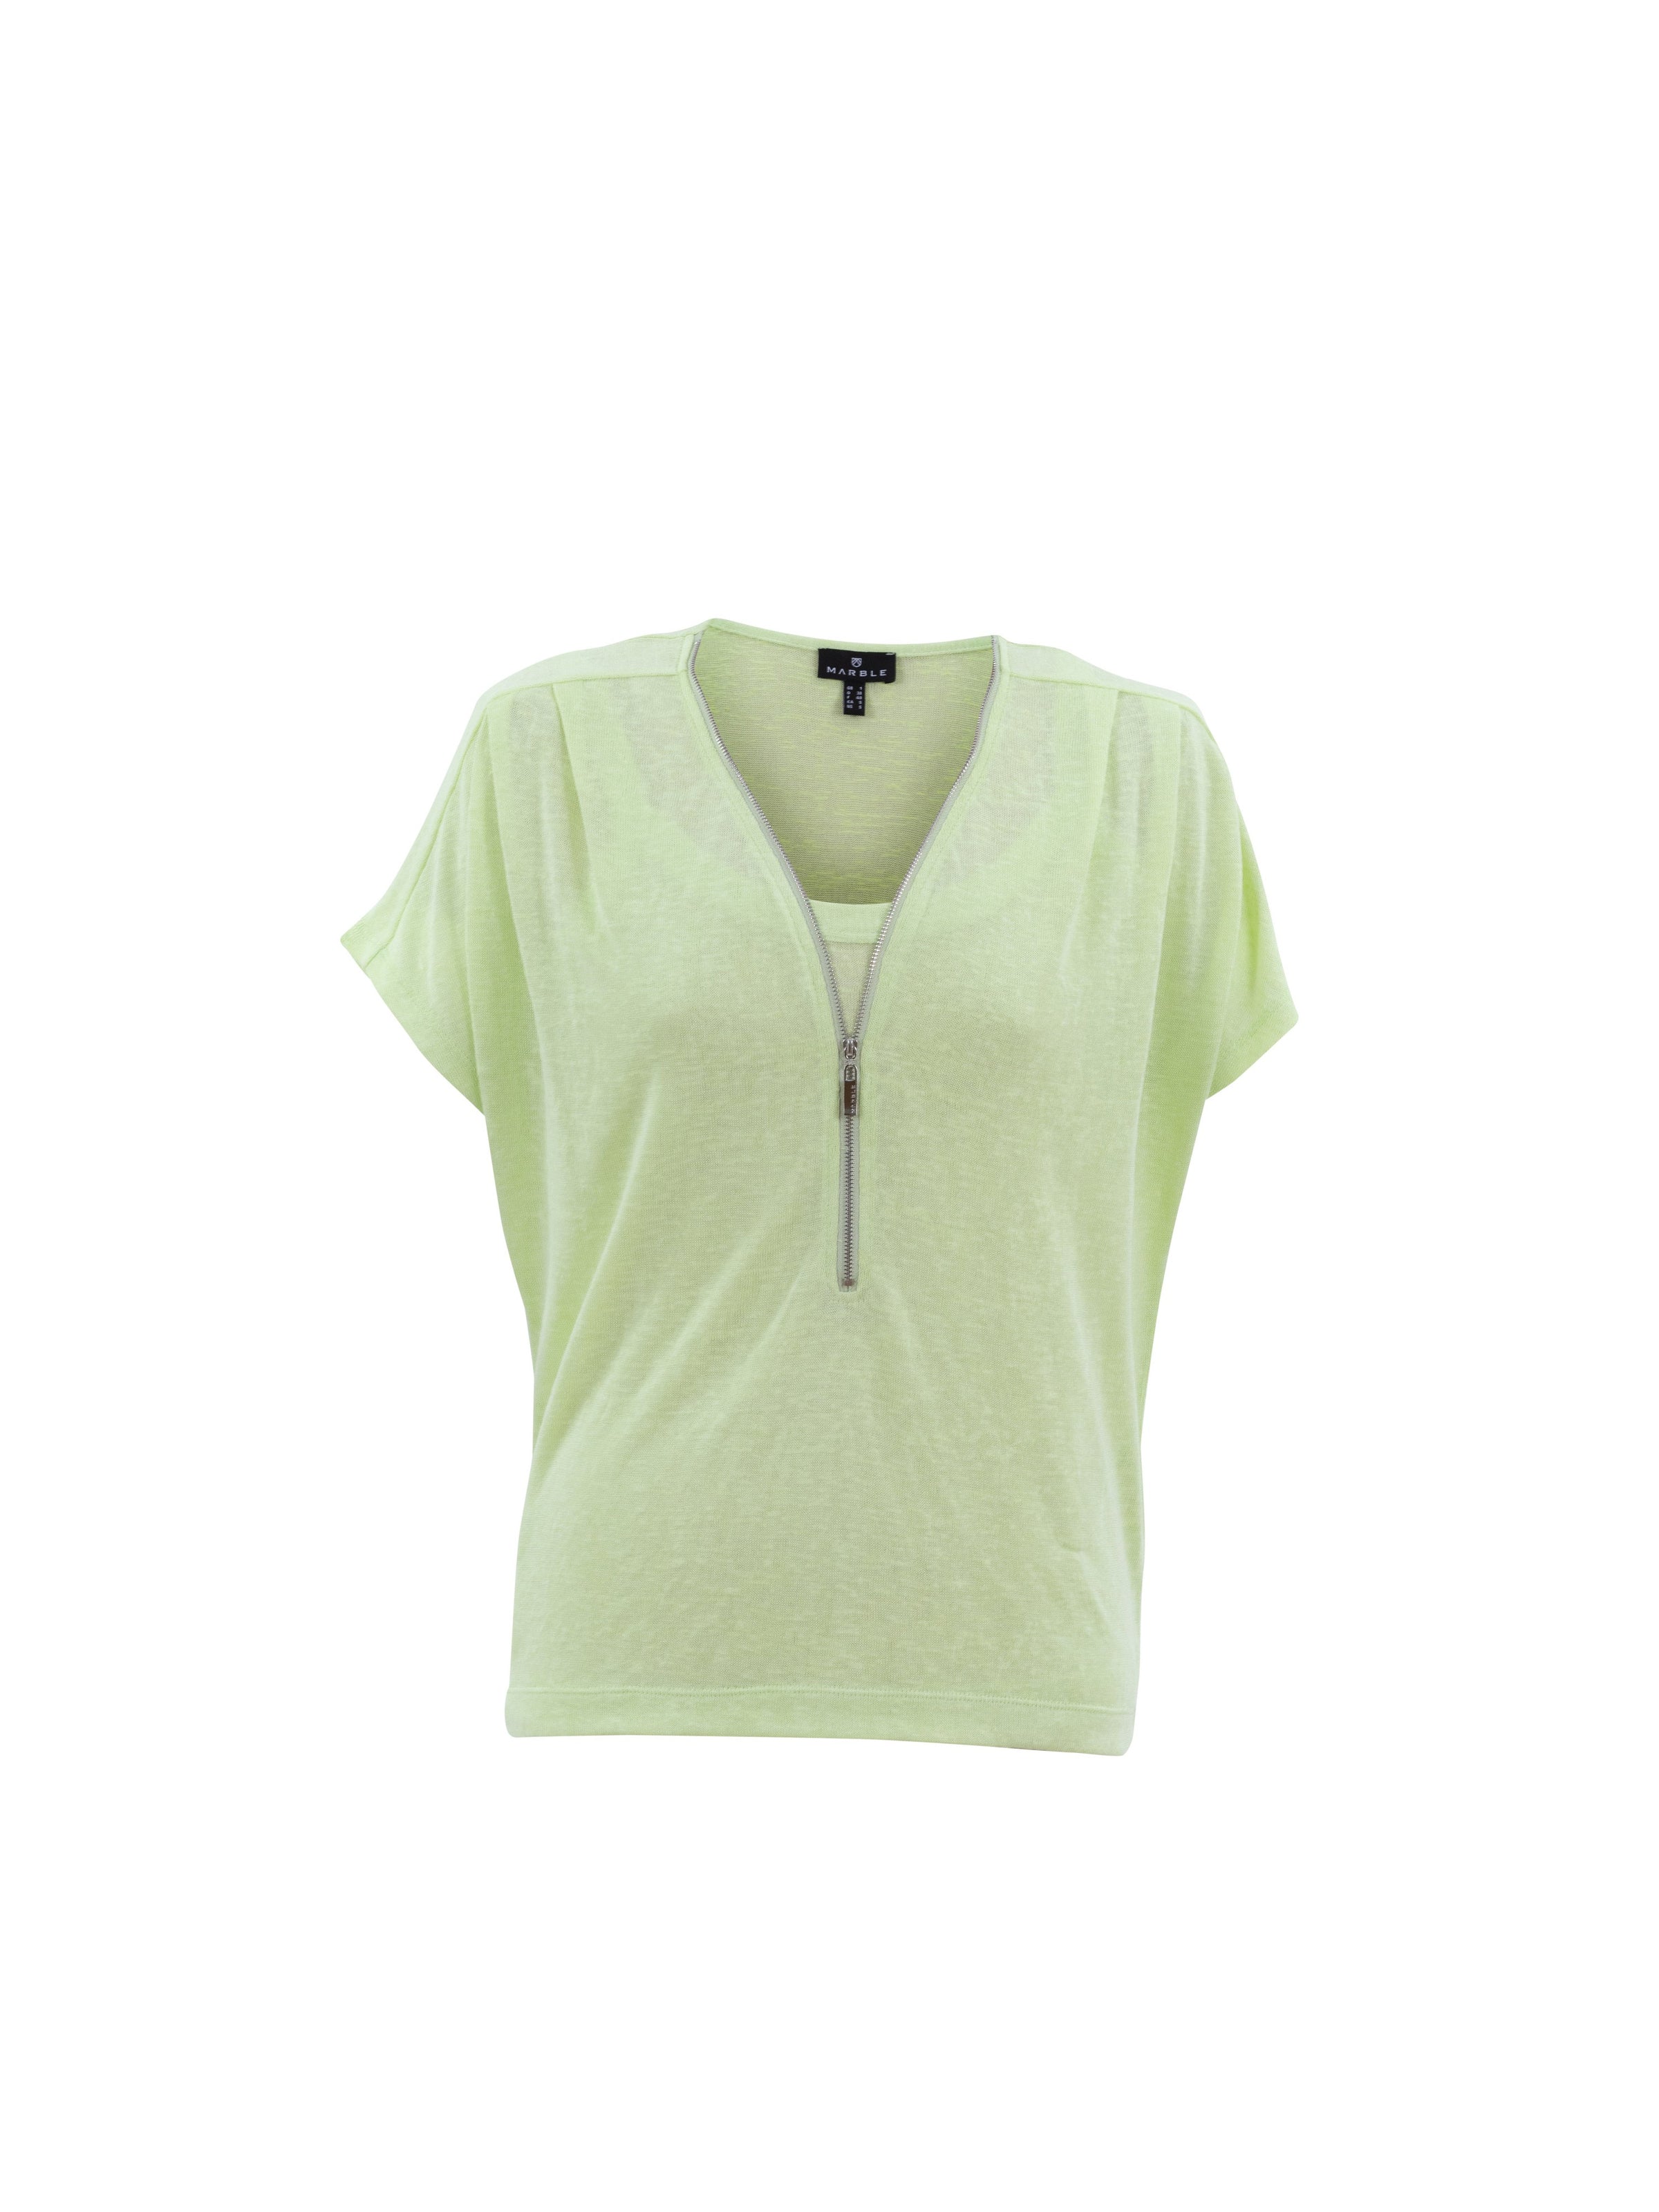 Marble Lime Top with Zipper and Tank